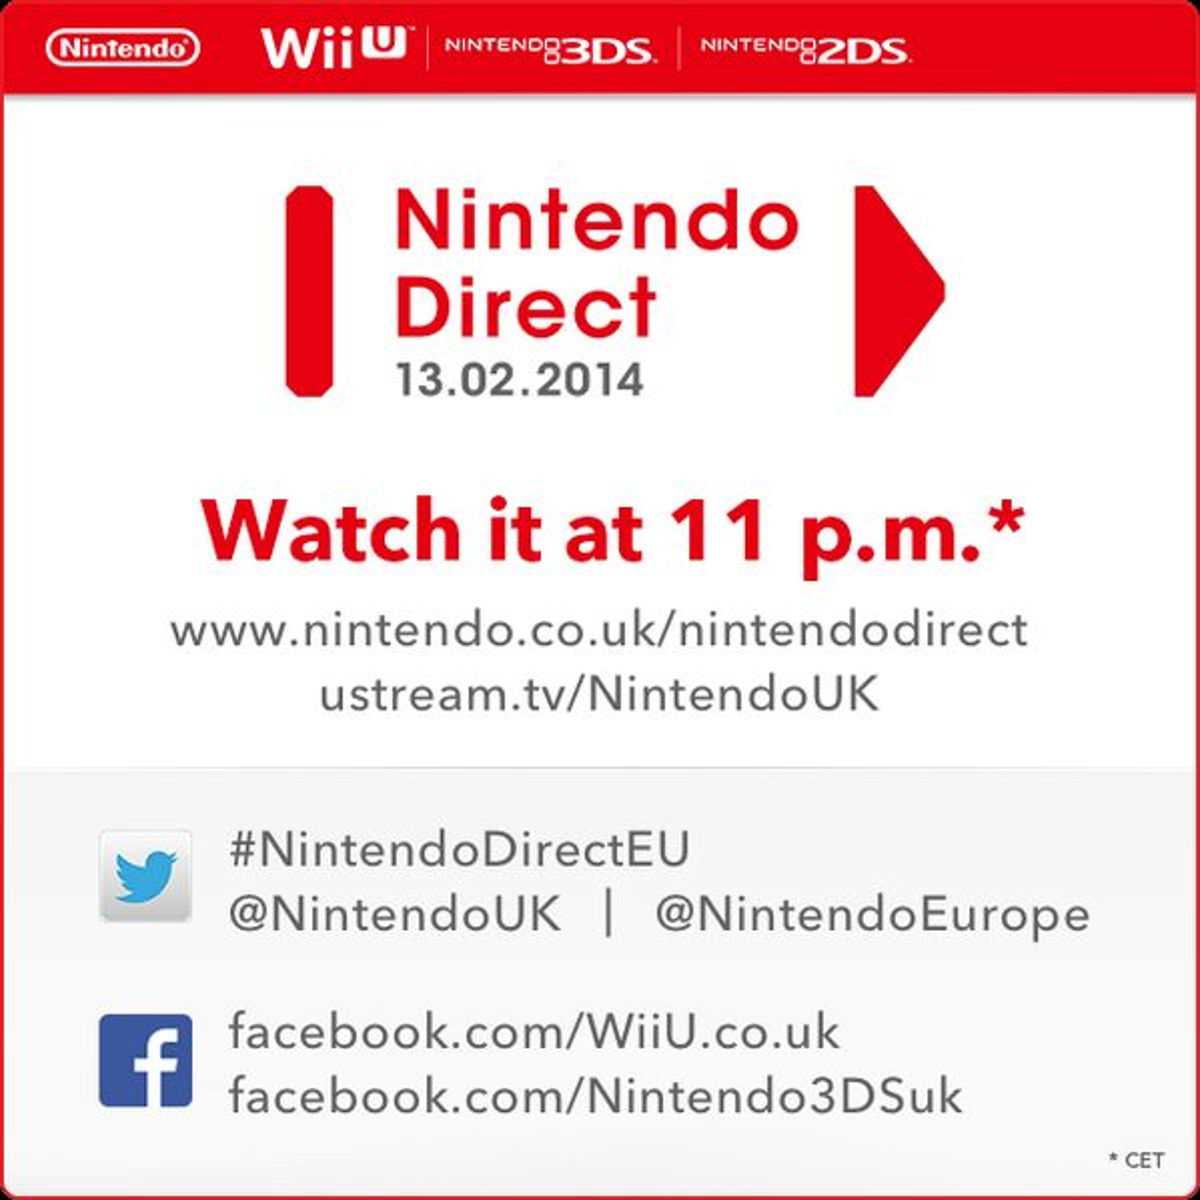 How to watch Nintendo Direct, UK start time and how to watch